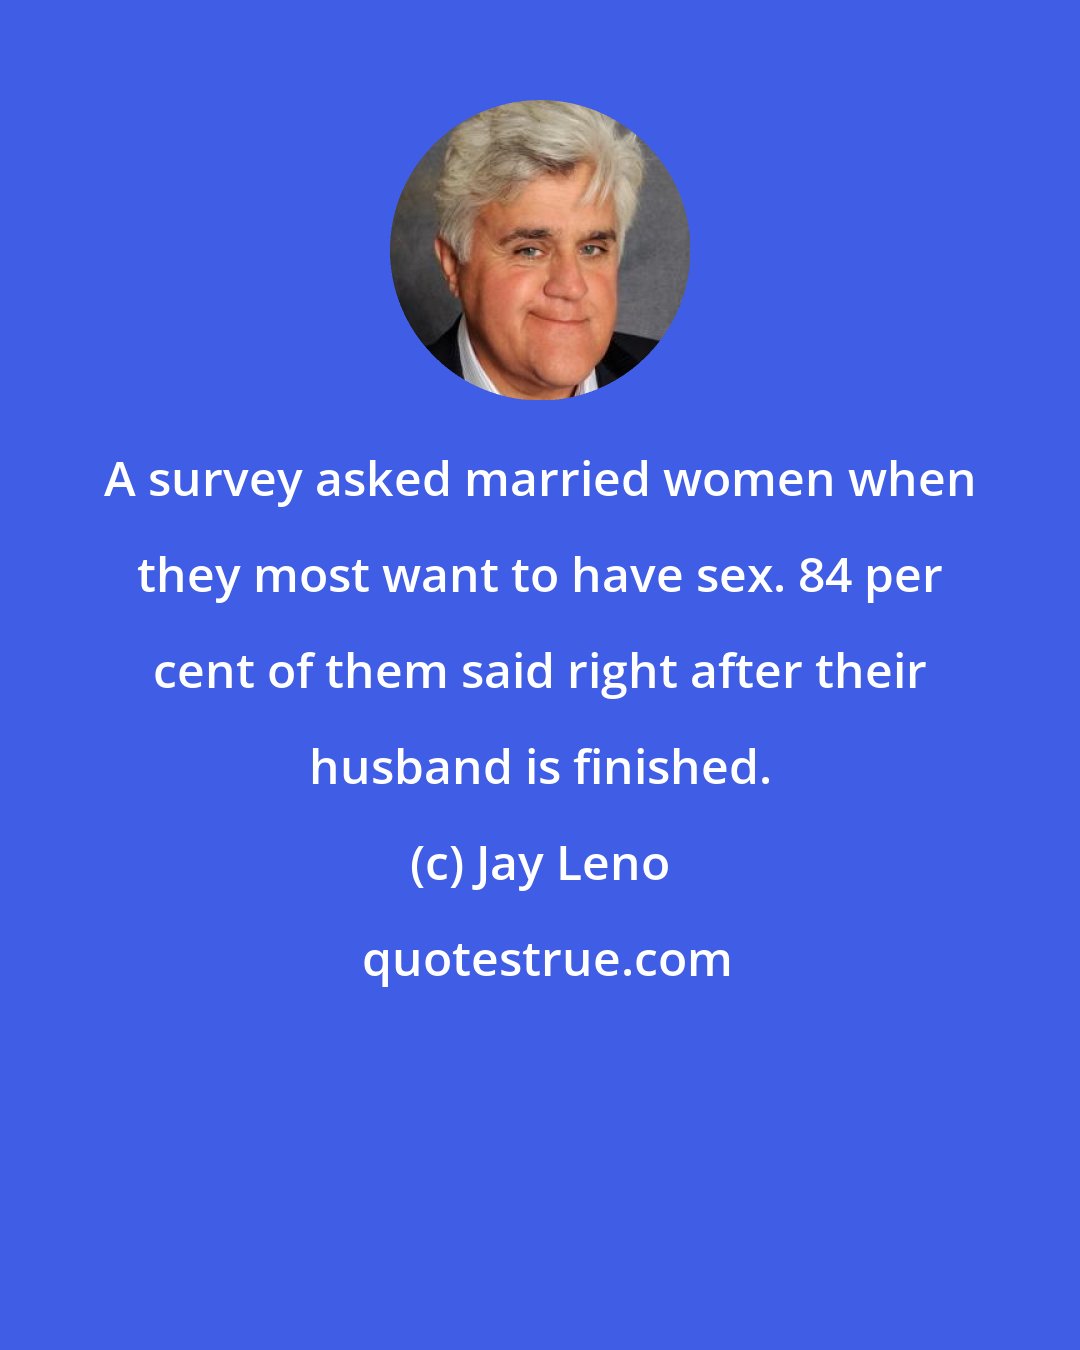 Jay Leno: A survey asked married women when they most want to have sex. 84 per cent of them said right after their husband is finished.